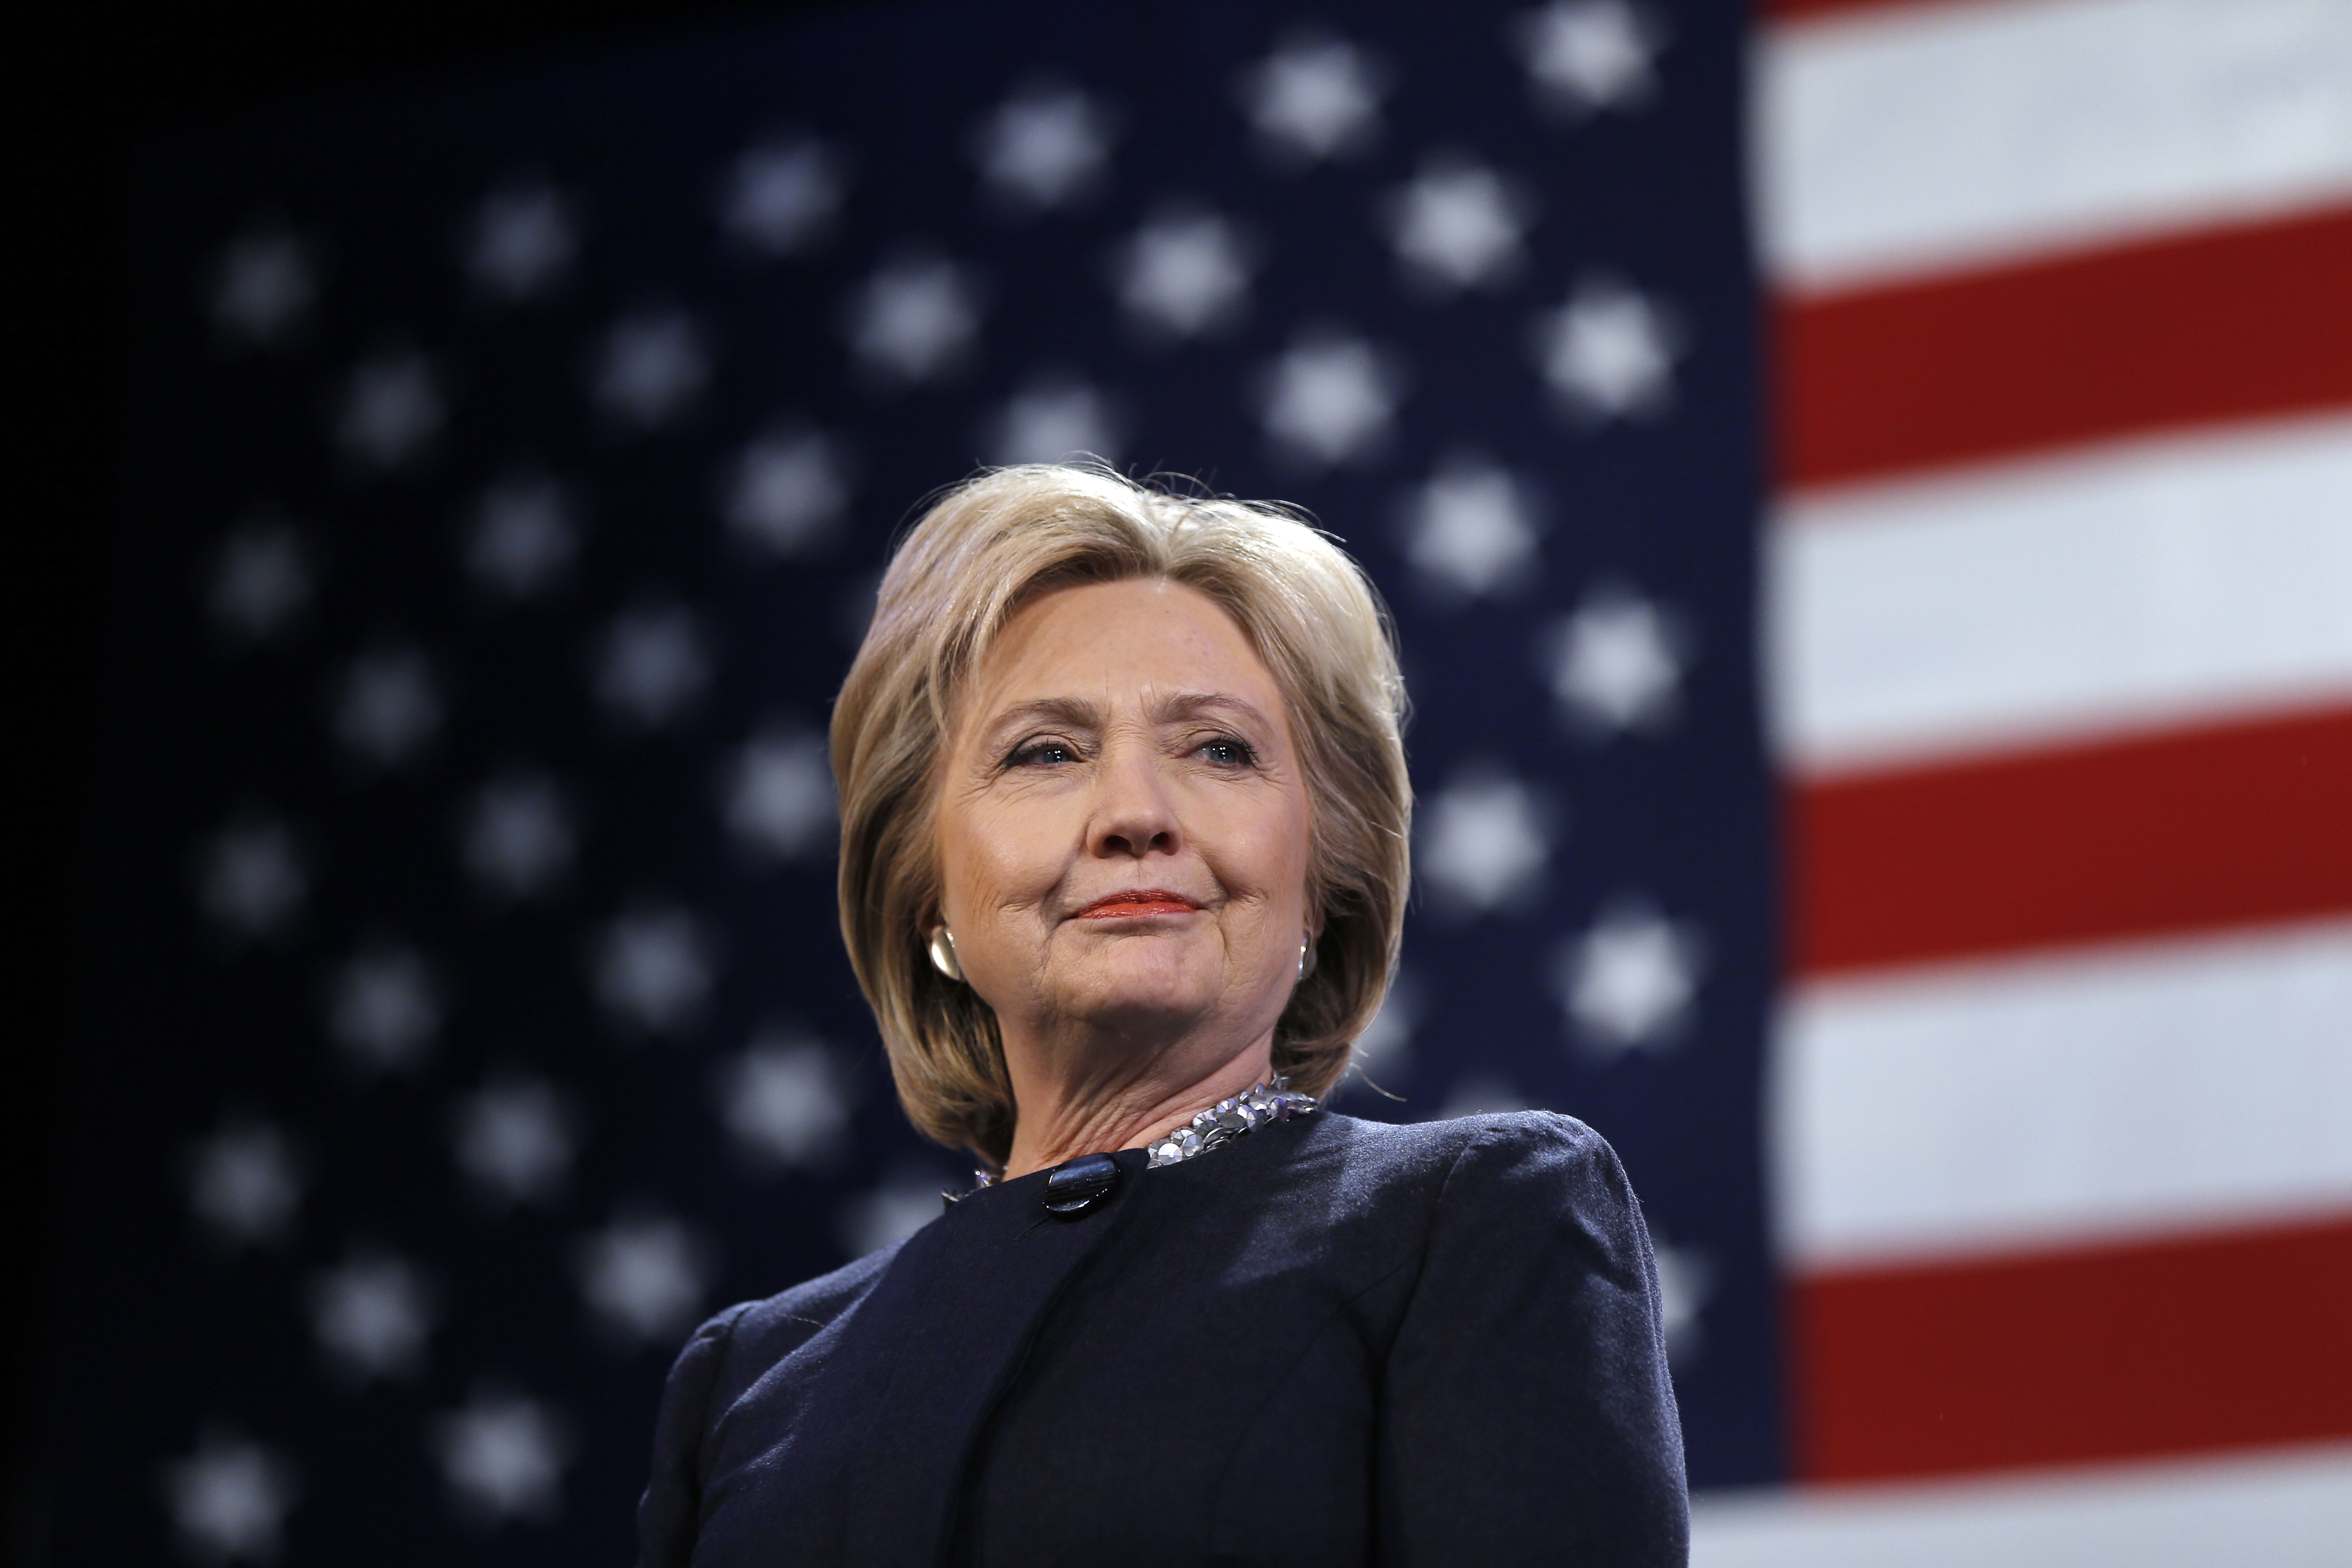 Will Hillary Clinton rise to presidency and reform America? 